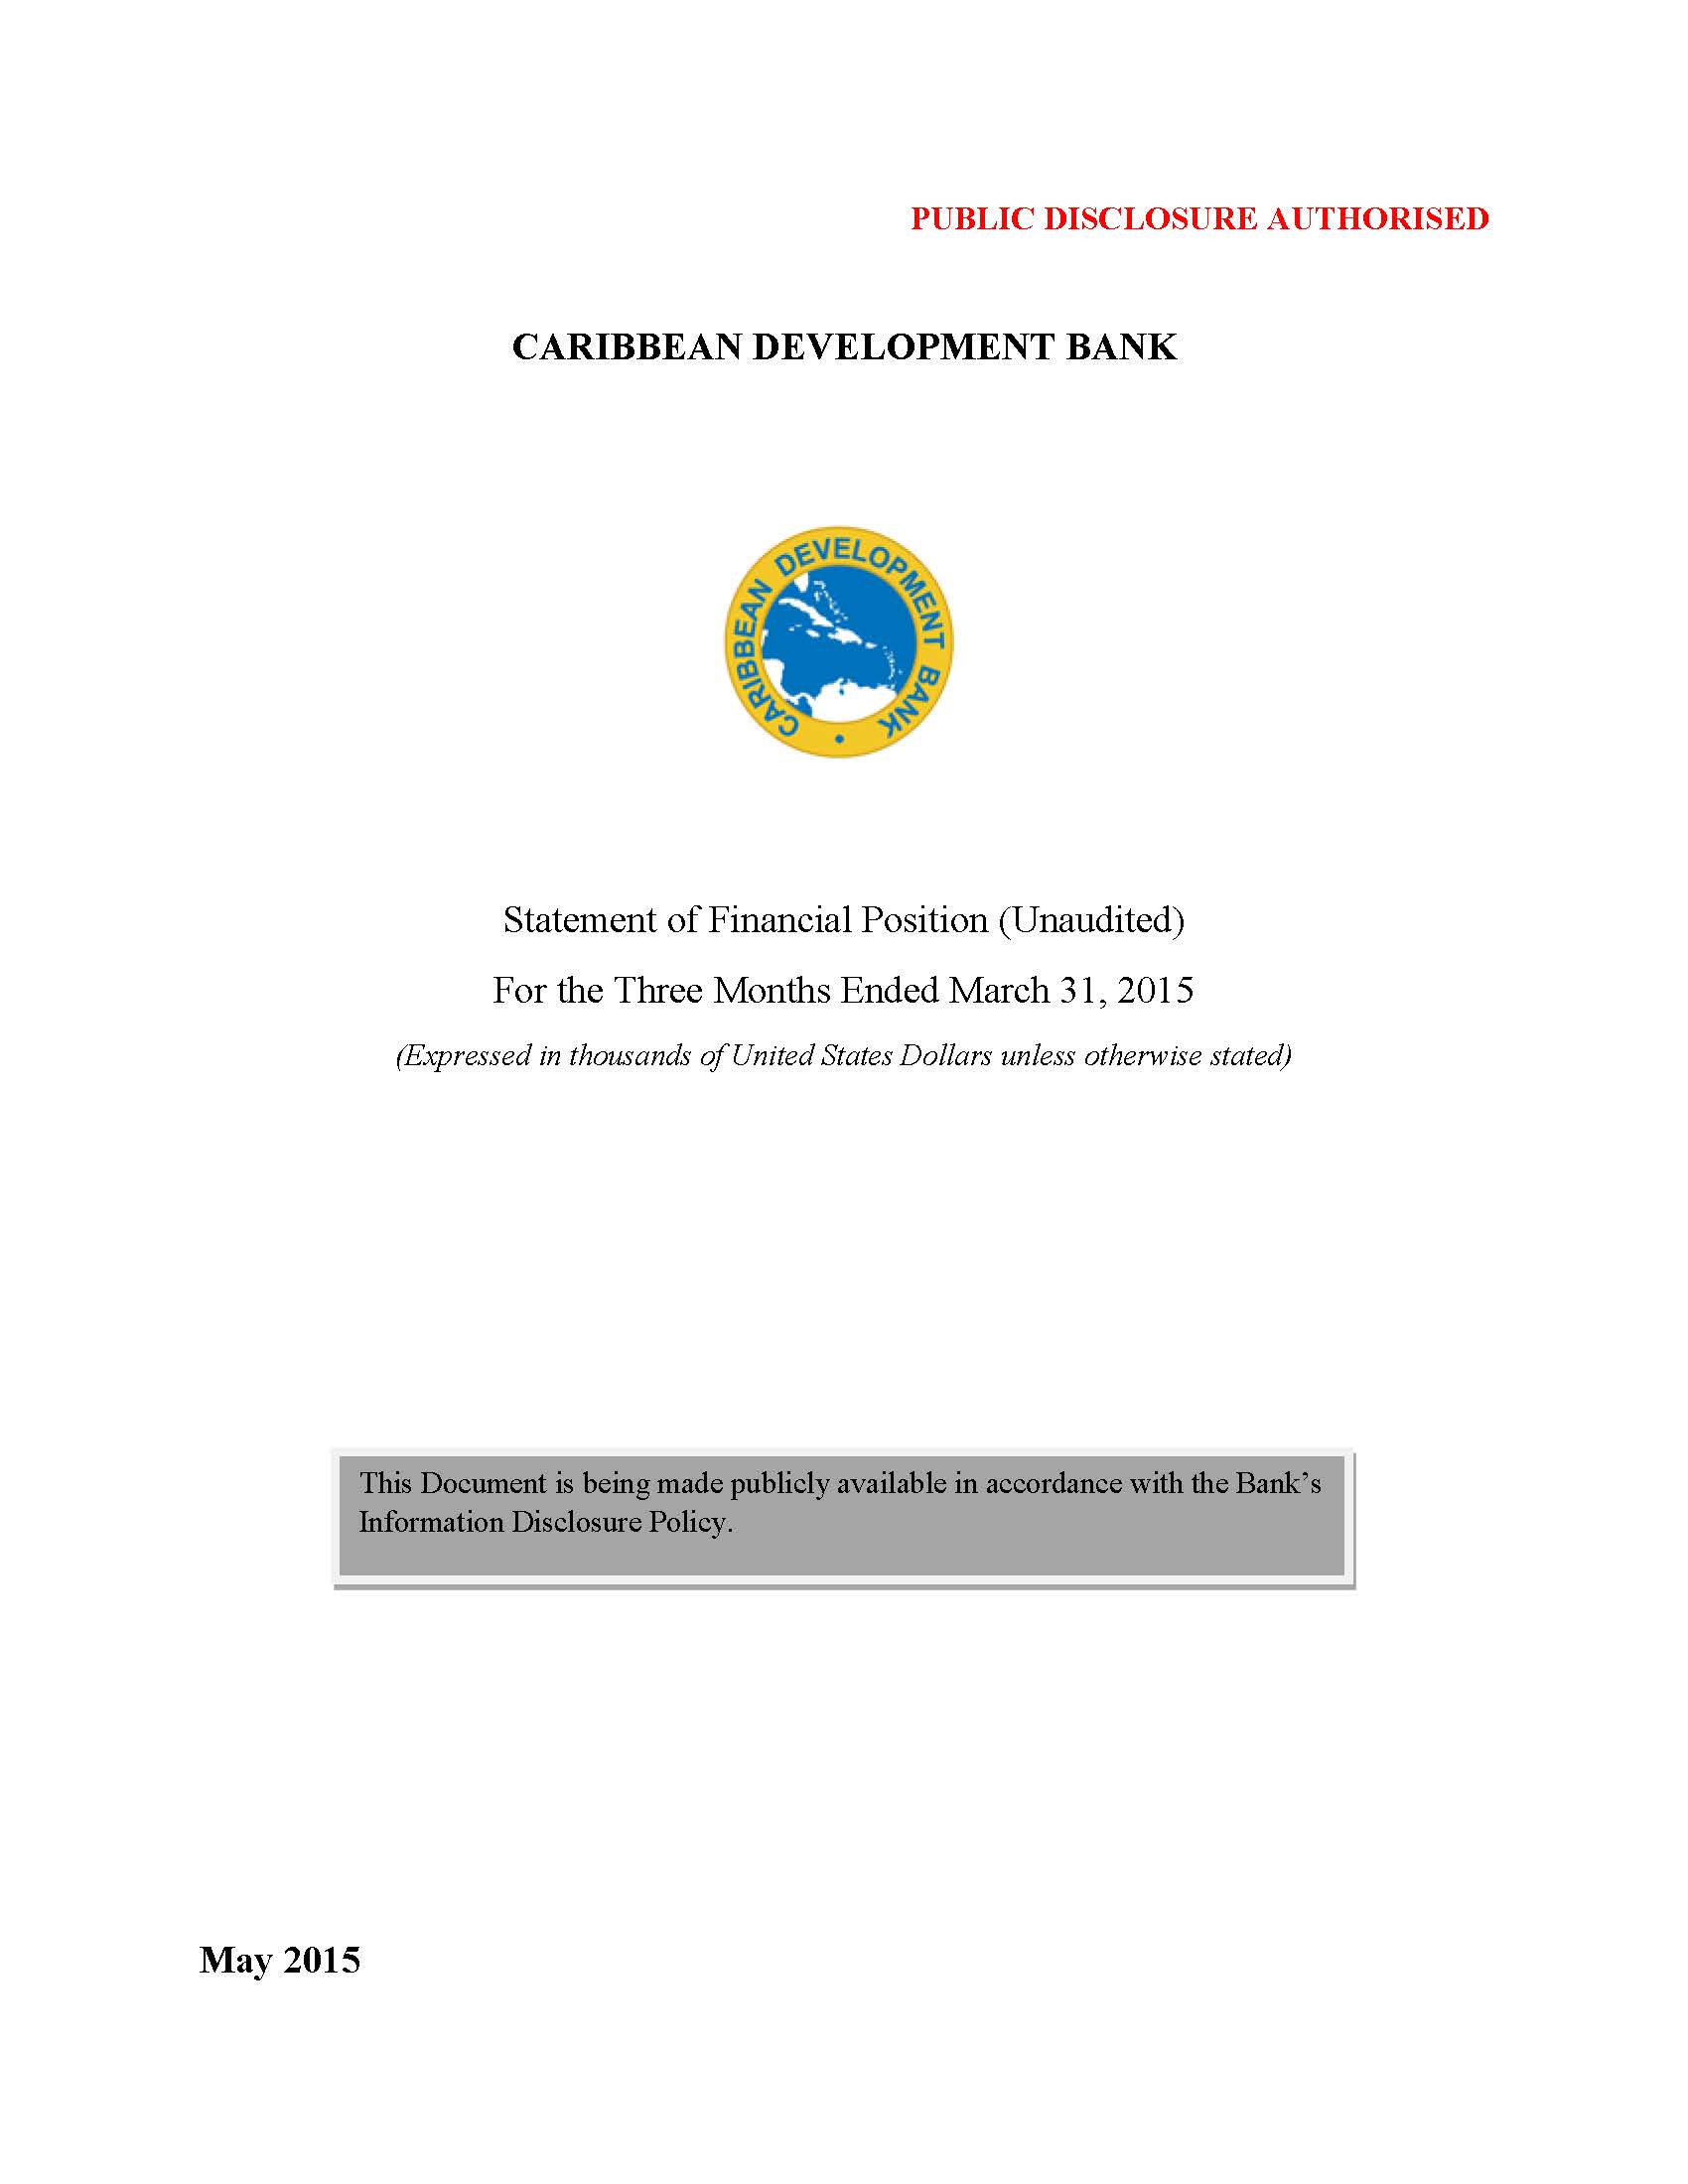 text-based cover featuring document title on white page